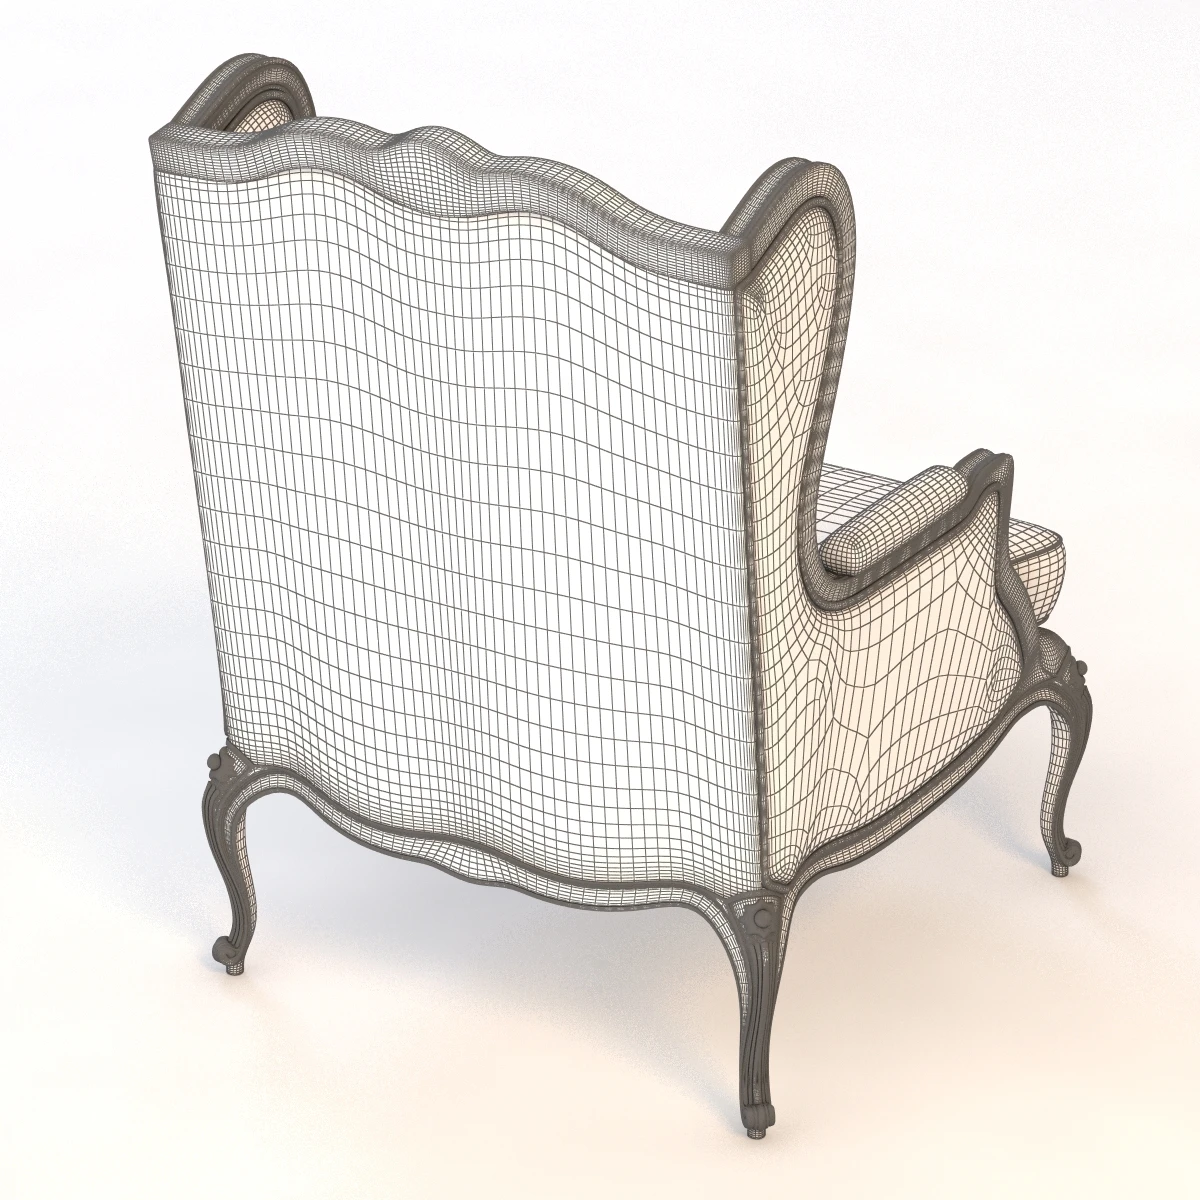 Louis Xv Style Gilded Wing Chair 3D Model_013